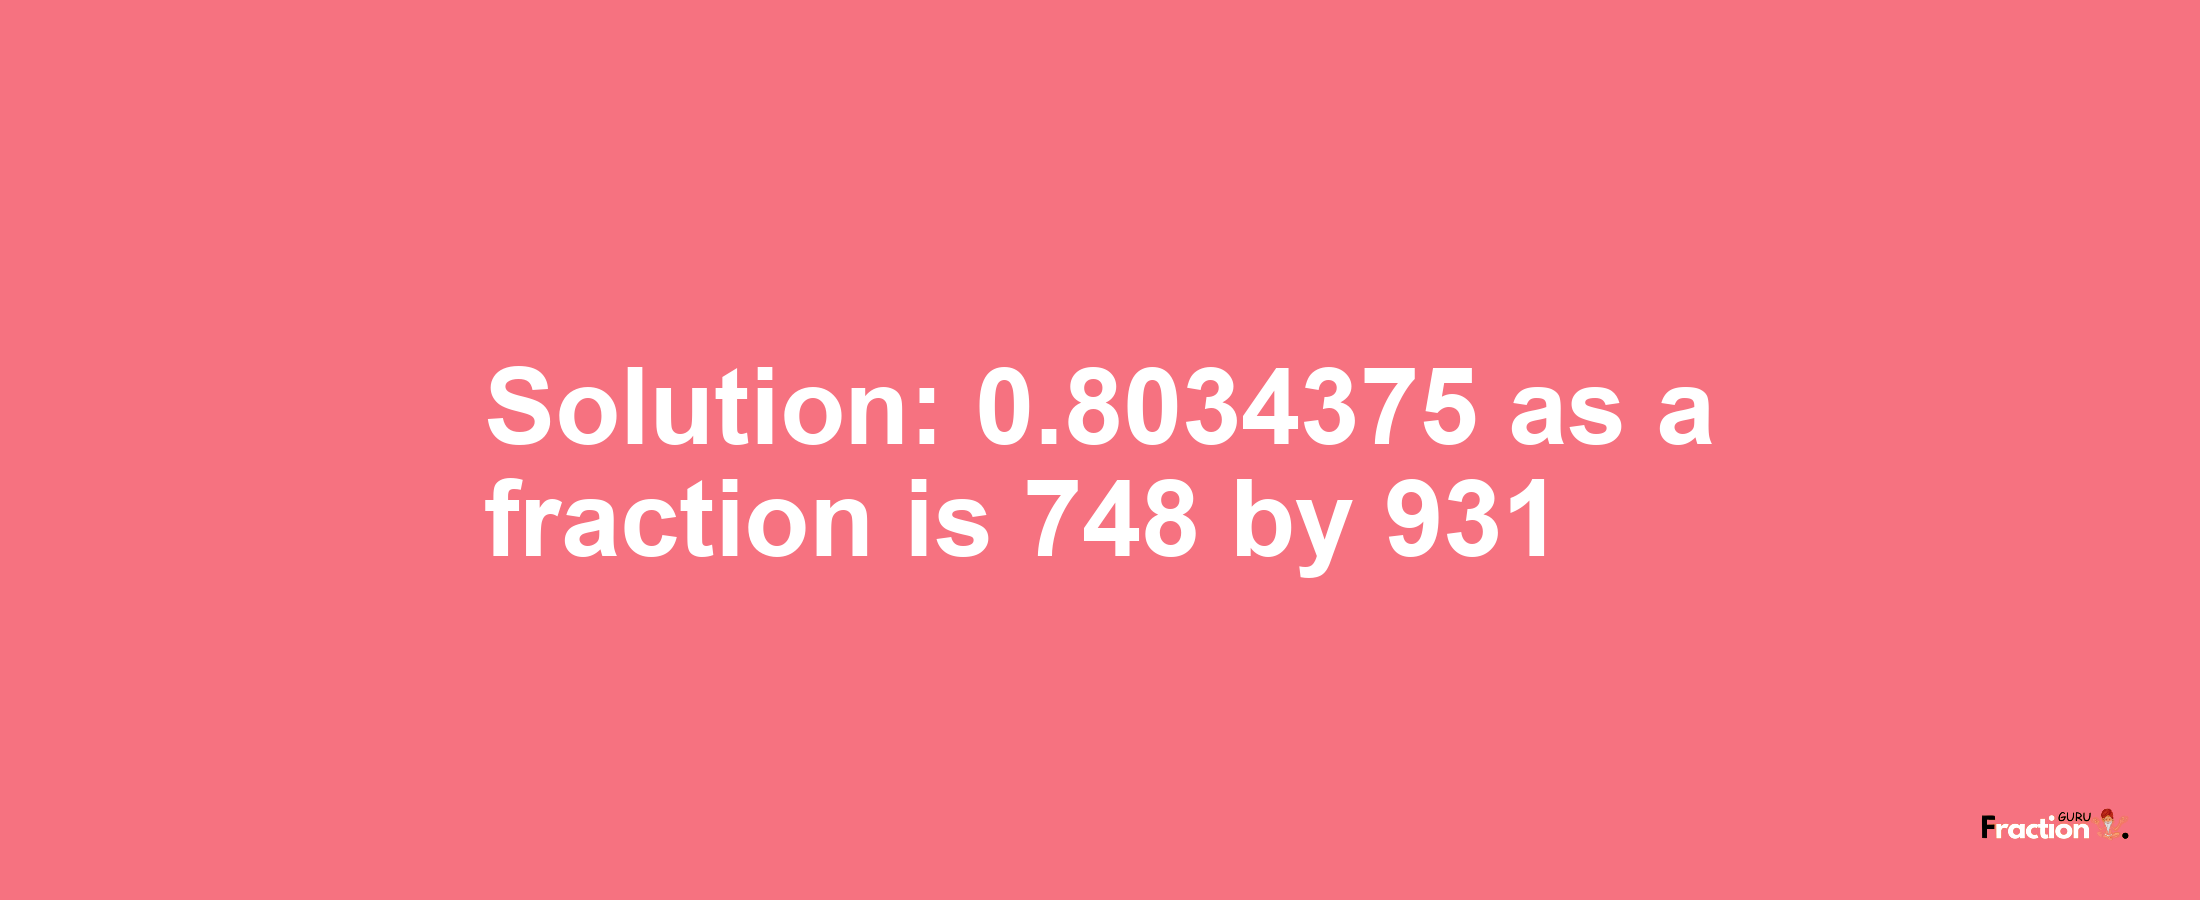 Solution:0.8034375 as a fraction is 748/931